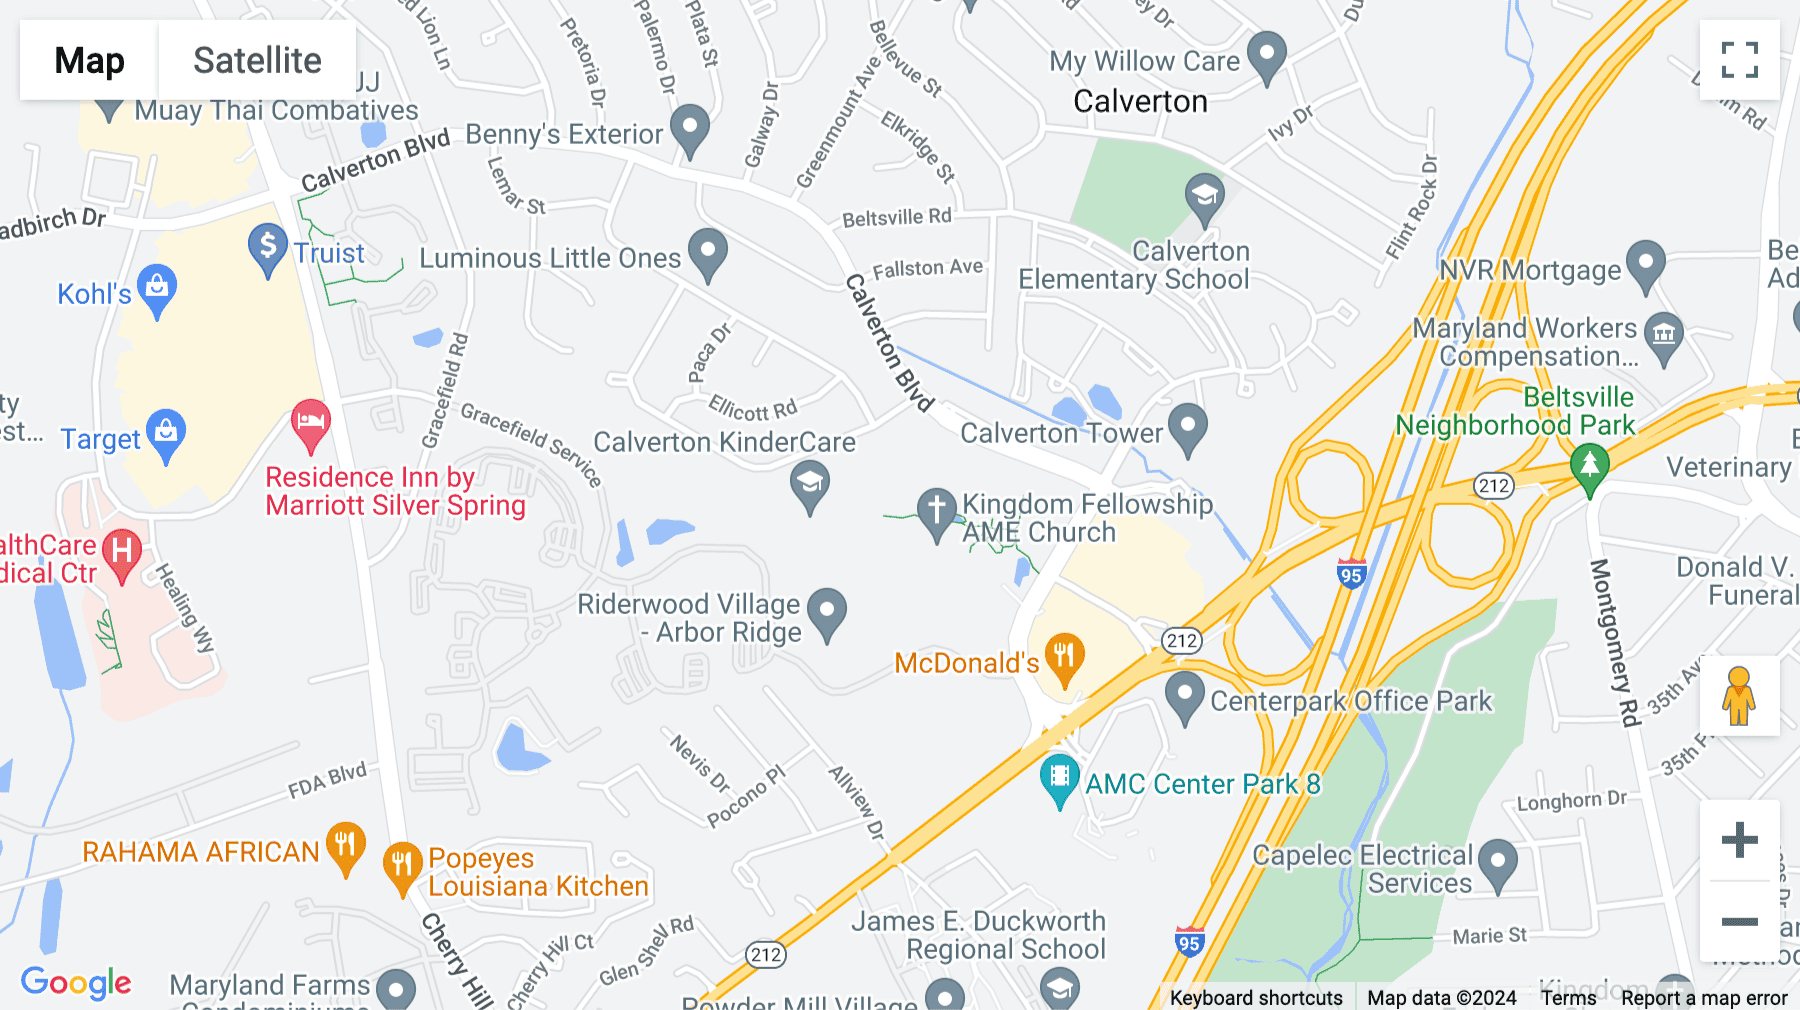 Click for interative map of 11720 Beltsville Drive, Suite 500, Silver Spring